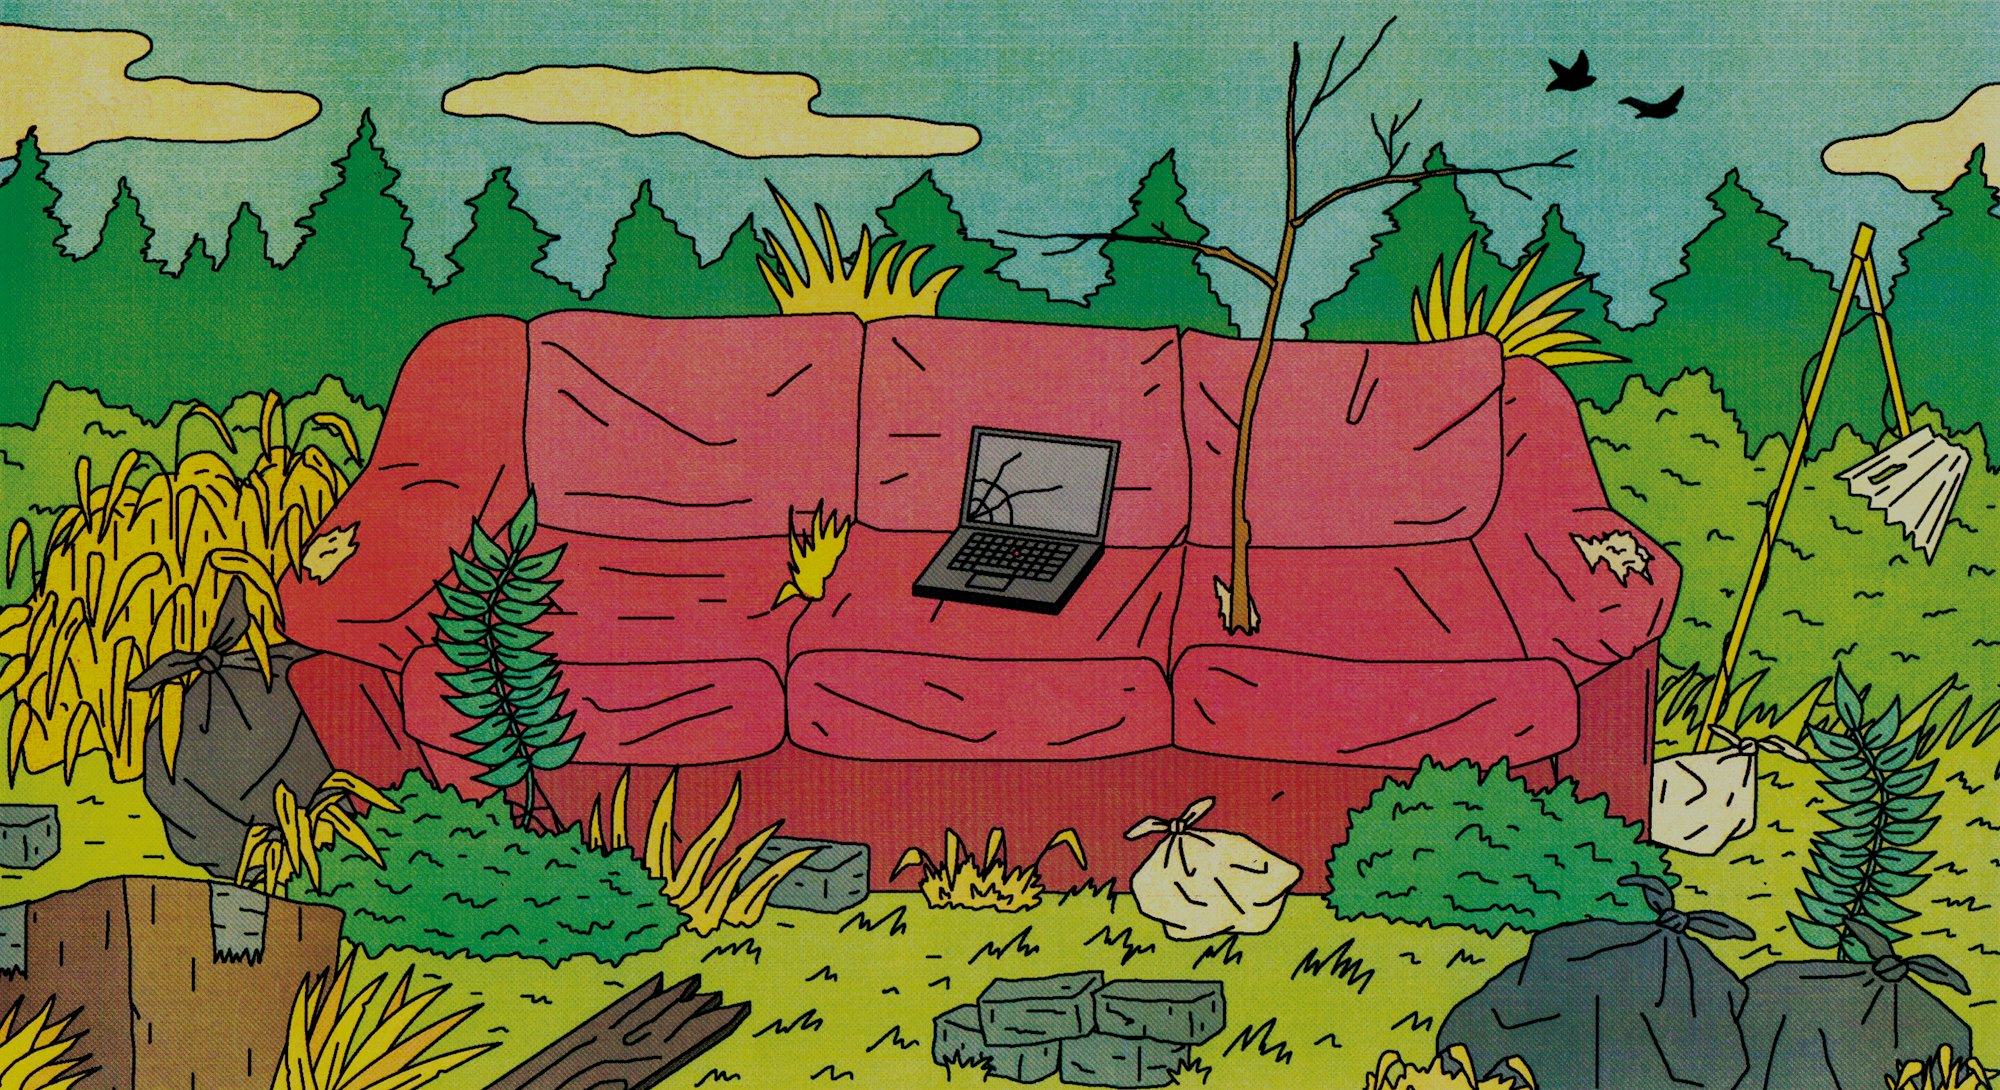 An illustration of an old ruined couch in the wilderness amid trash